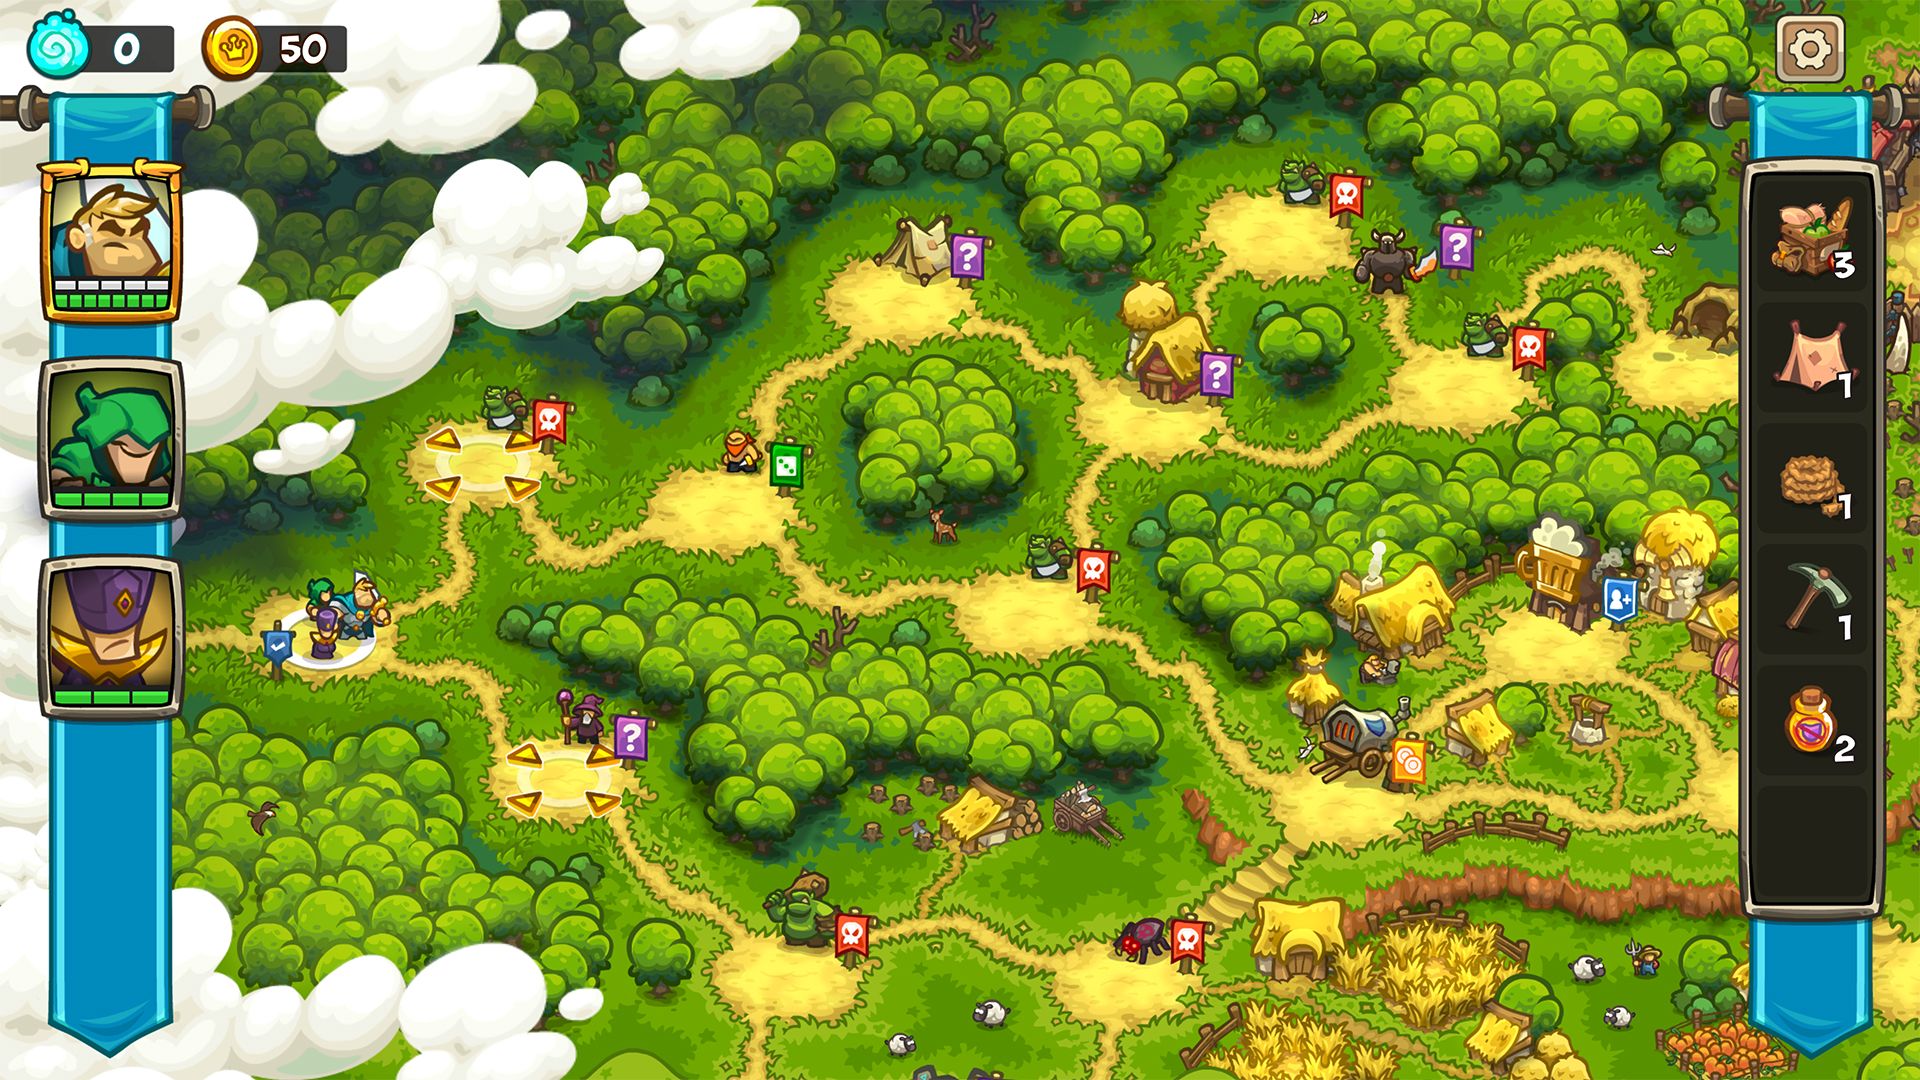 Screenshot from the game; the overworld map full of forest and yellow trails between quaint villages and enemy camps.